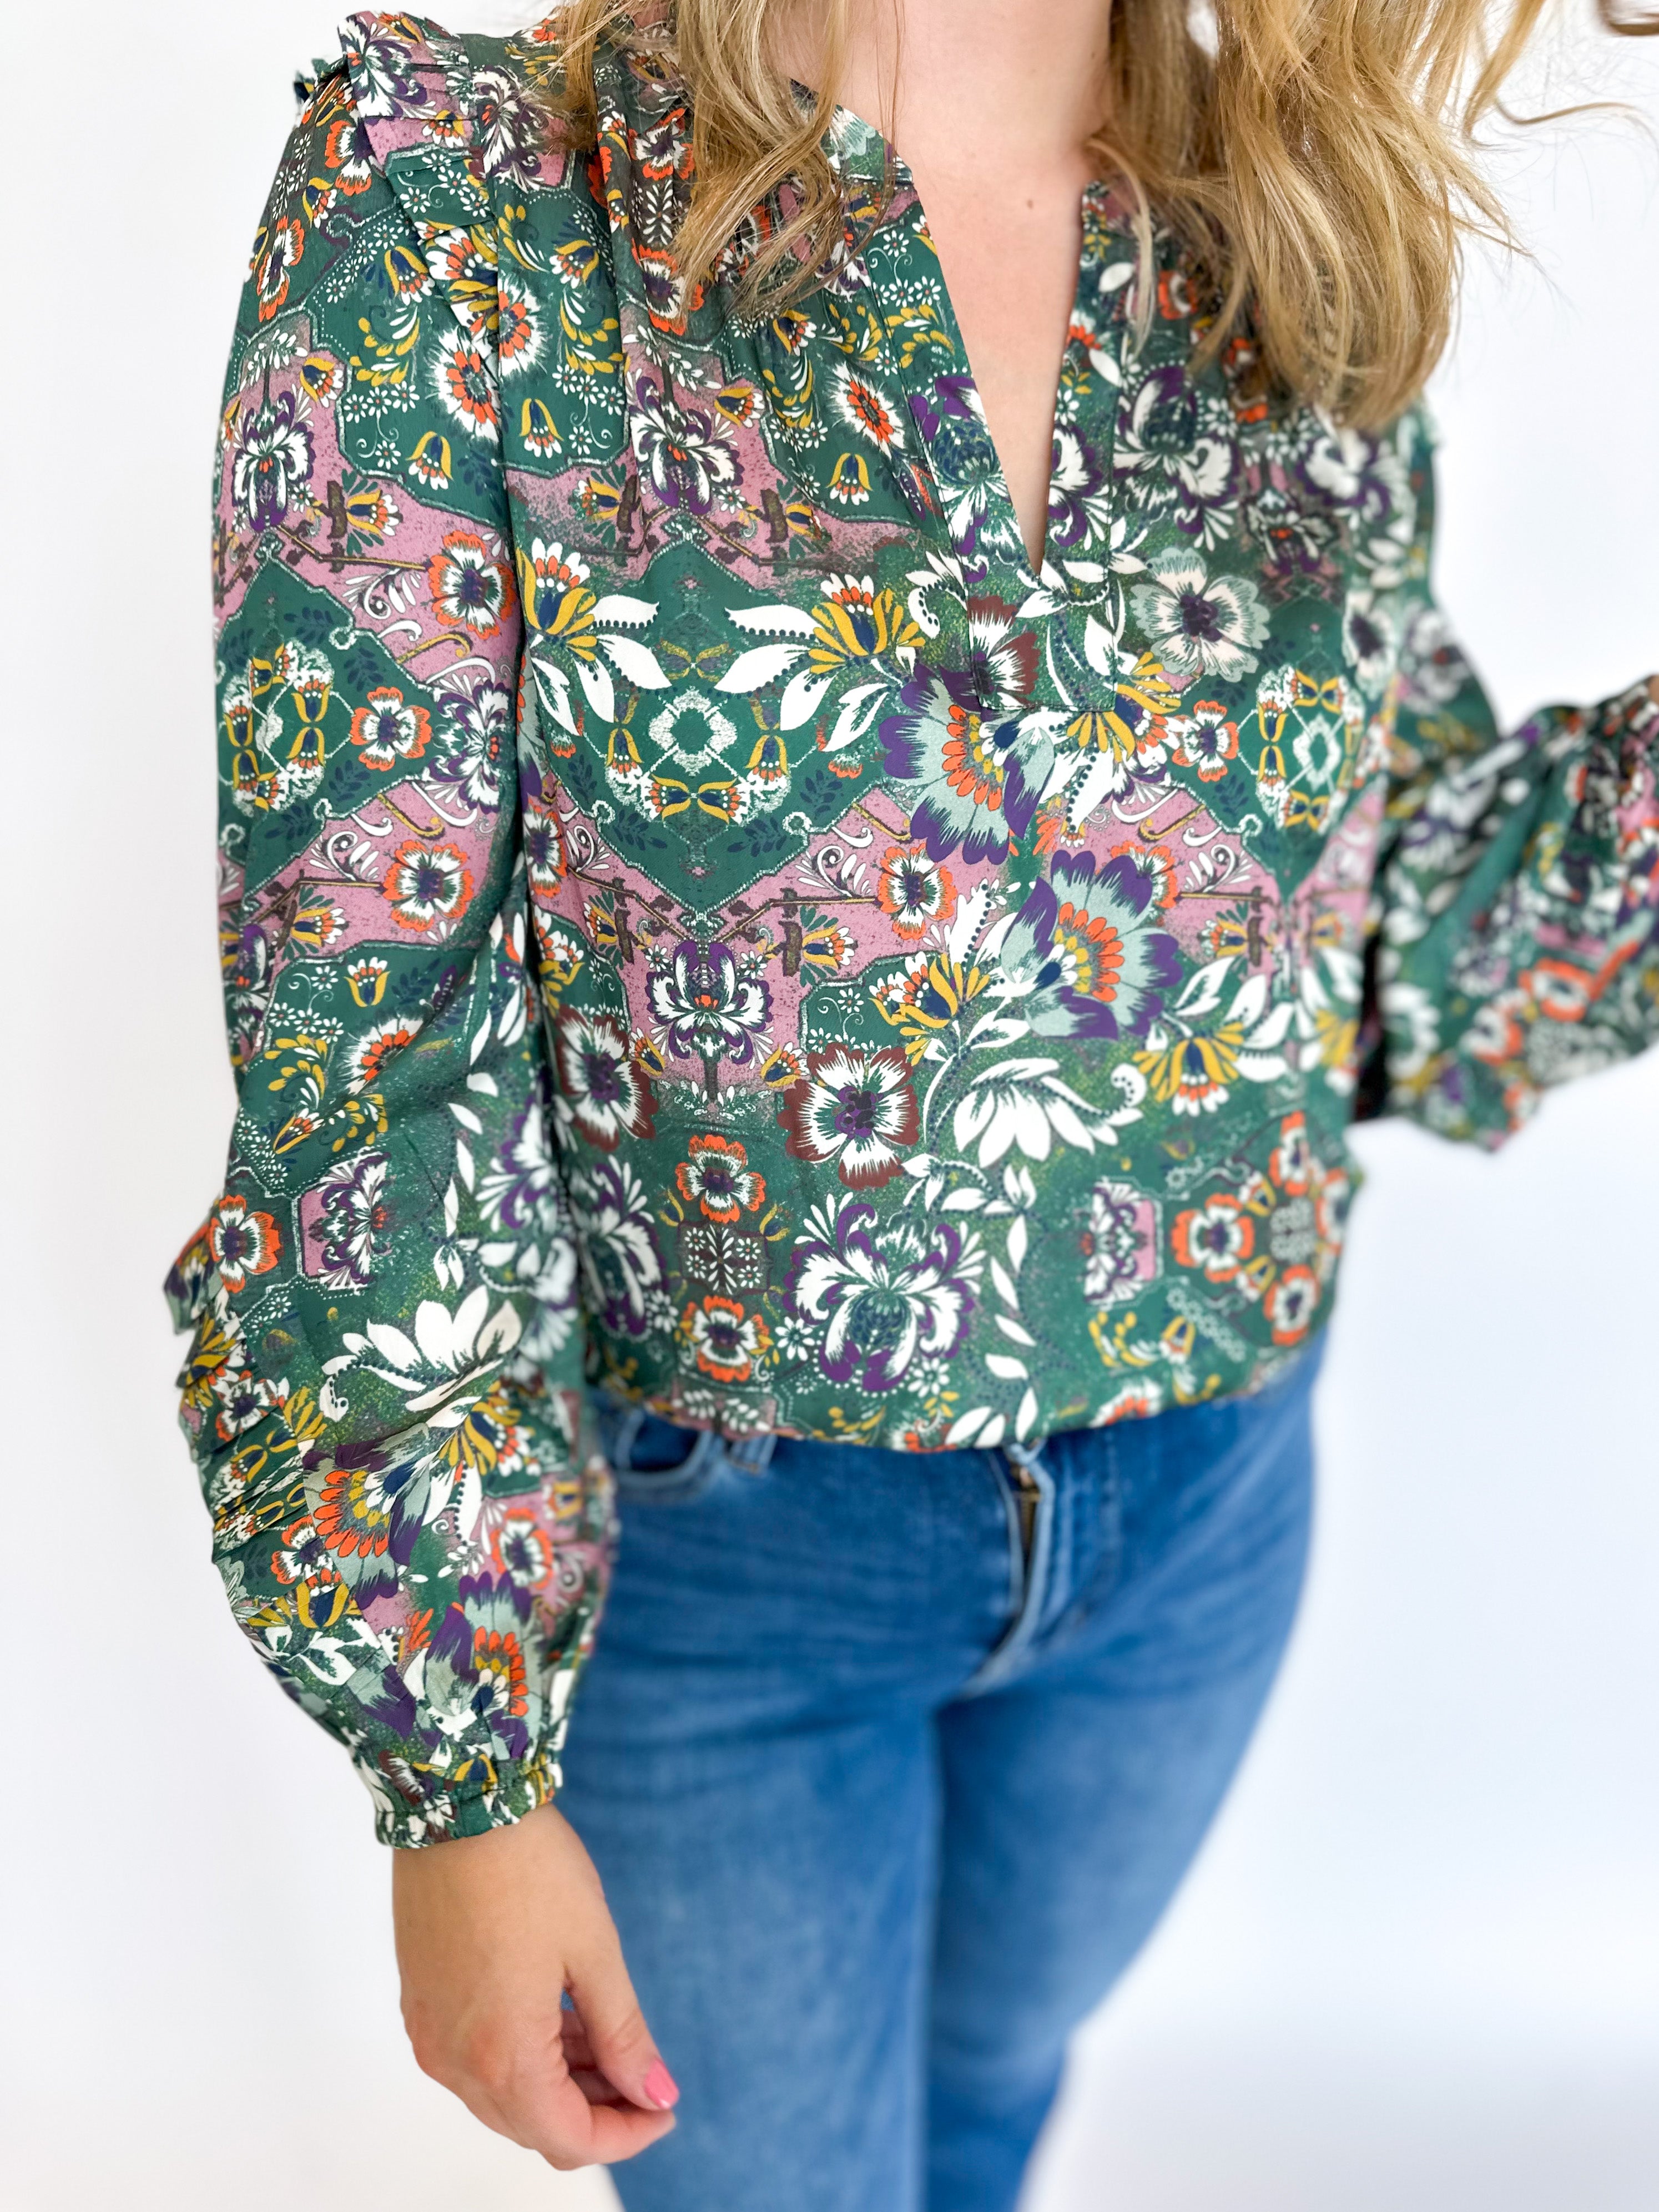 Vibrant Autumn Tones Blouse-200 Fashion Blouses-CURRENT AIR CLOTHING-July & June Women's Fashion Boutique Located in San Antonio, Texas